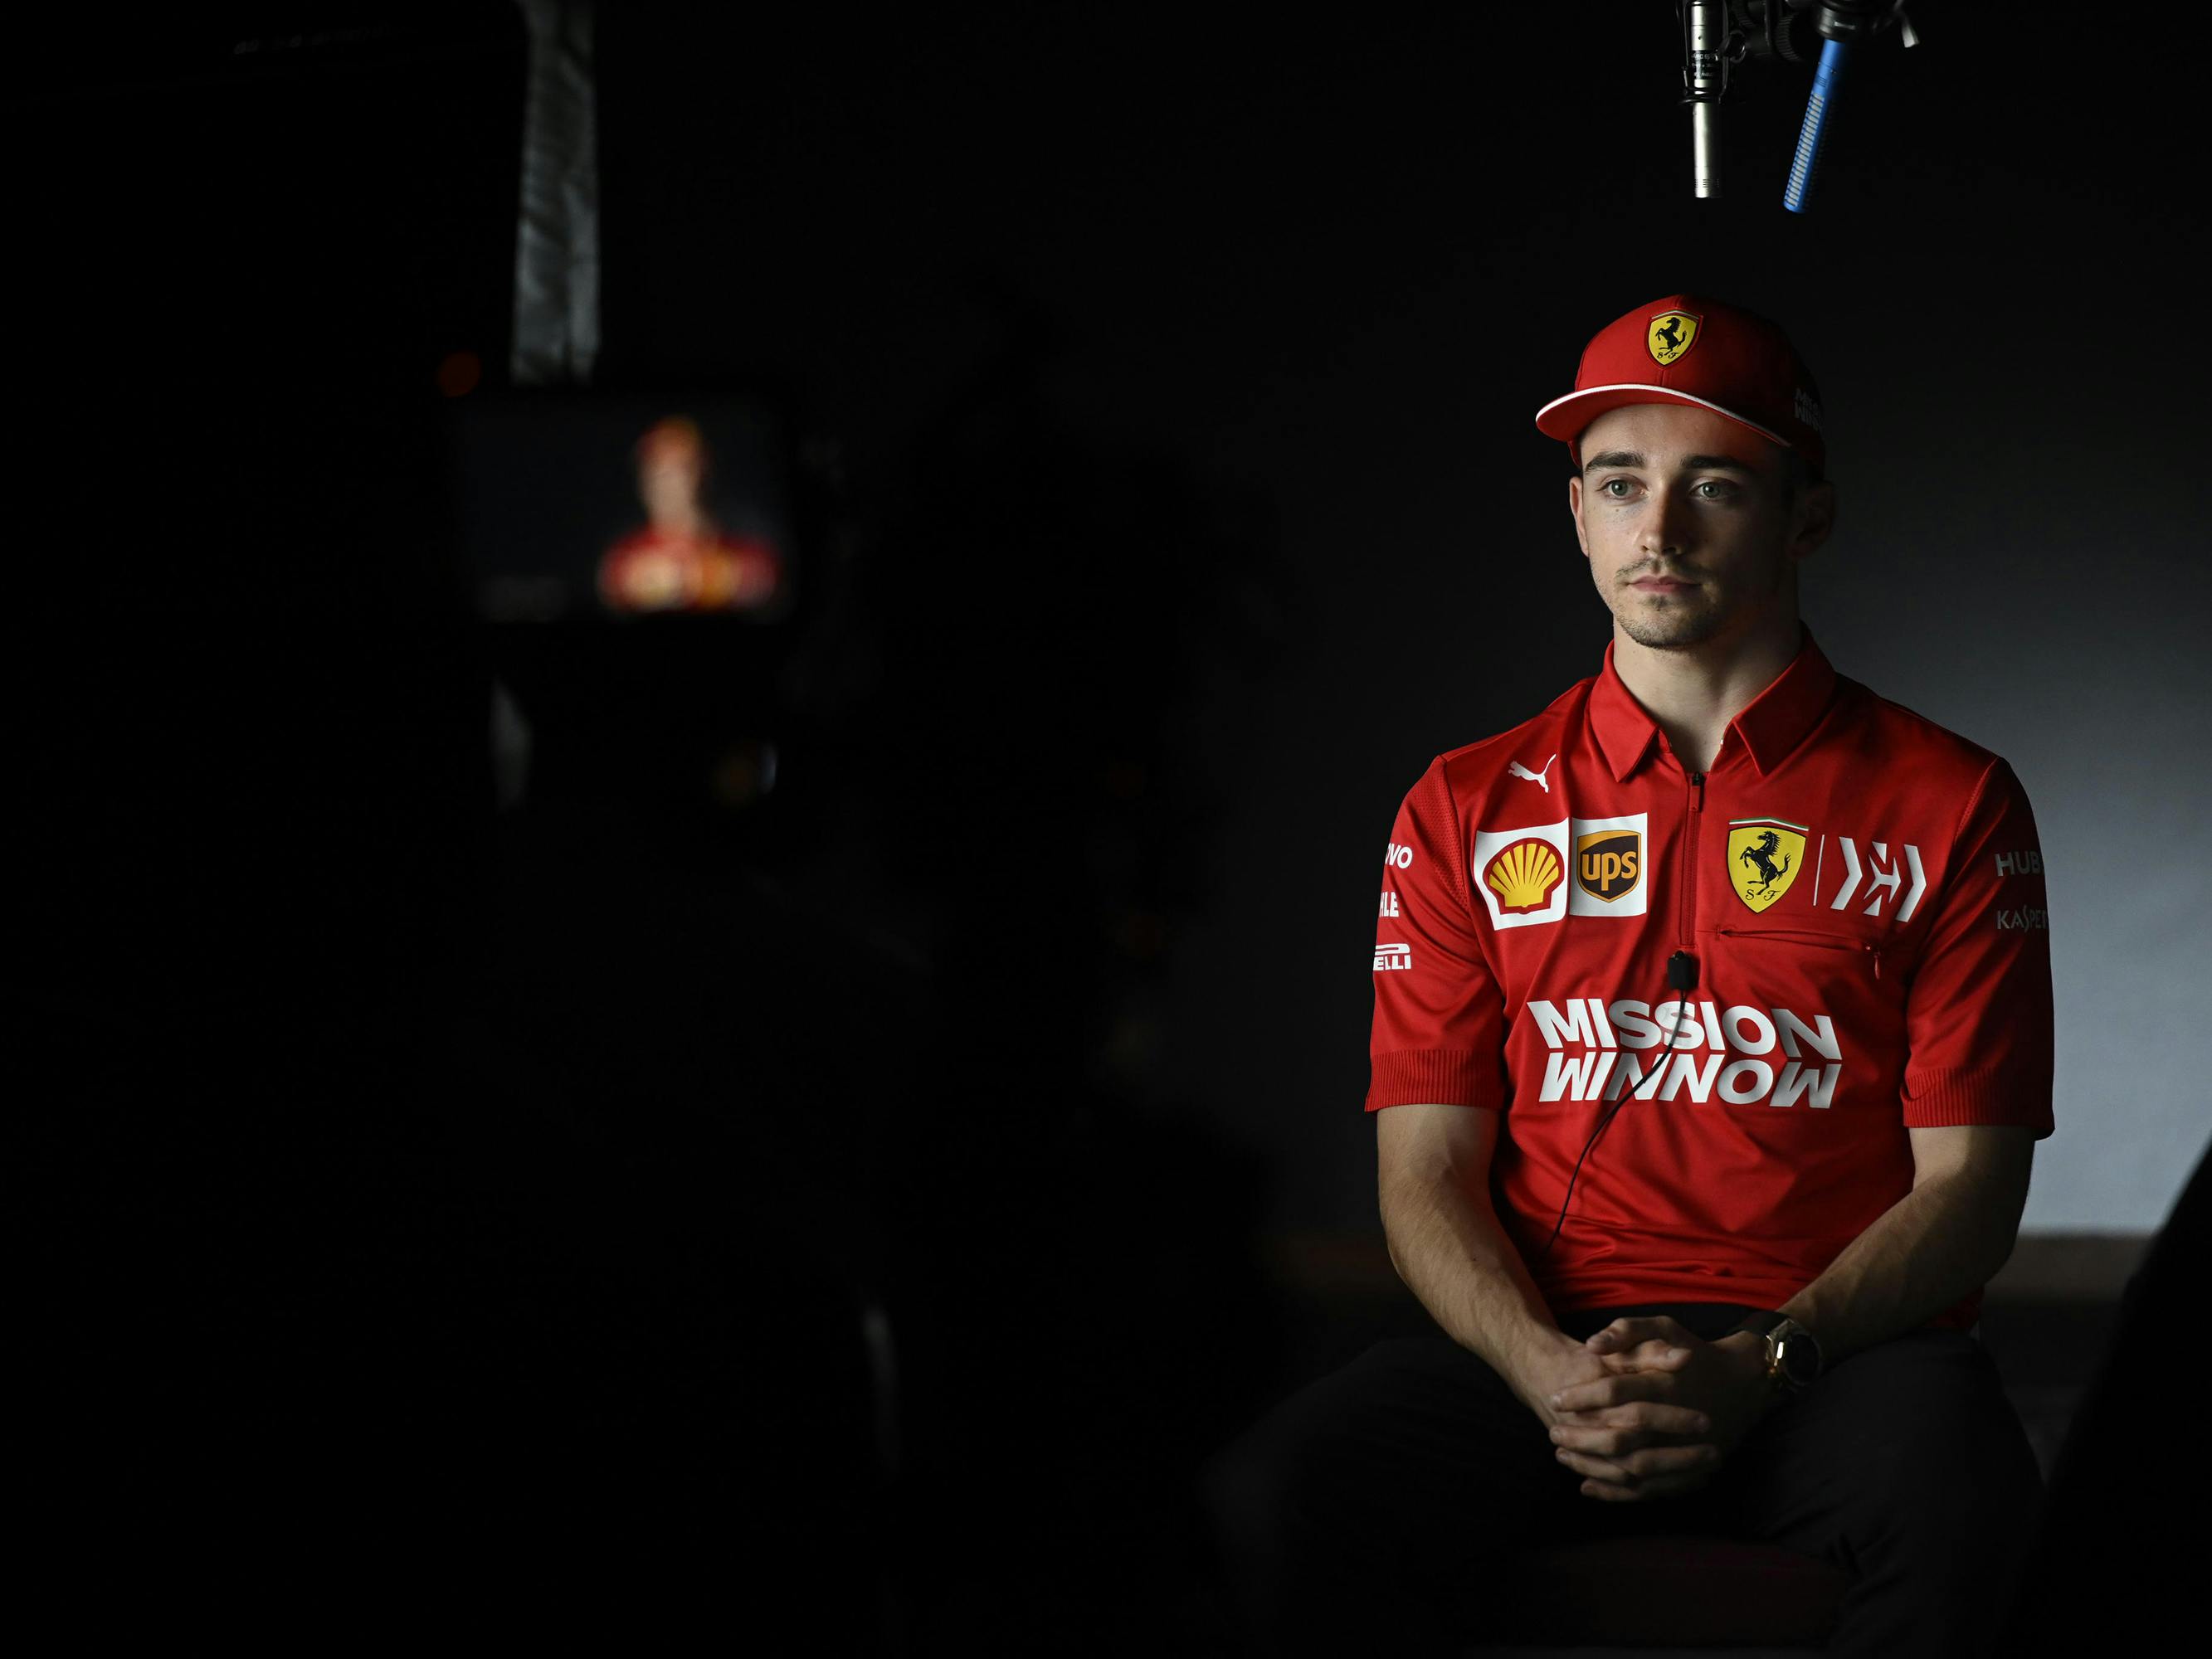 Charles Leclerc wears a red sponsored shirt and hat, and sits politely in the dark.